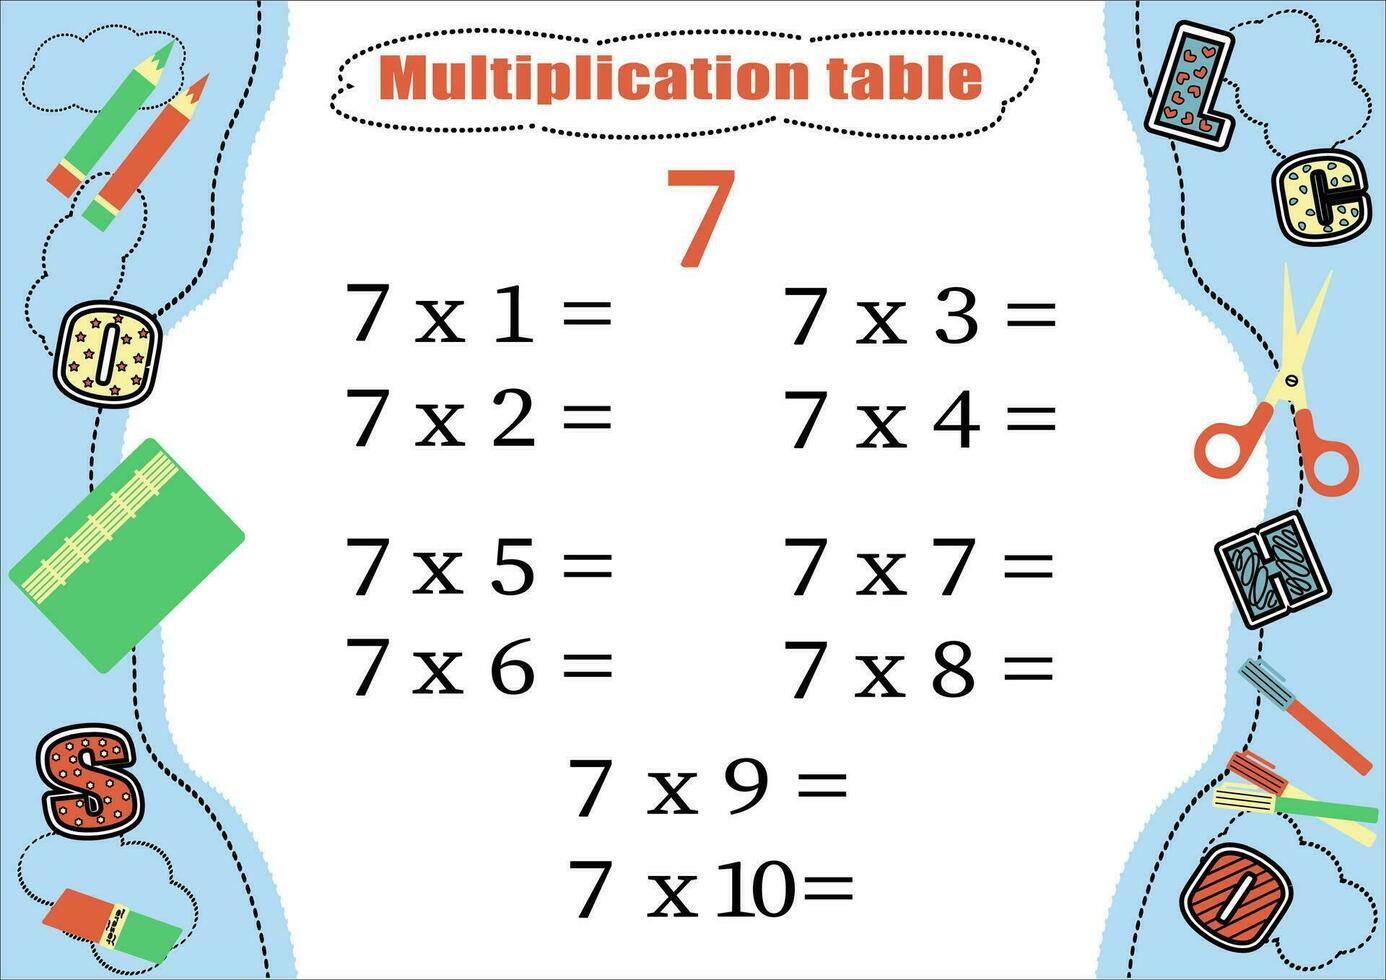 Multiplication table by 7 with a task to consolidate knowledge of multiplication. Colorful cartoon multiplication table vector for teaching math. School stationery. EPS10